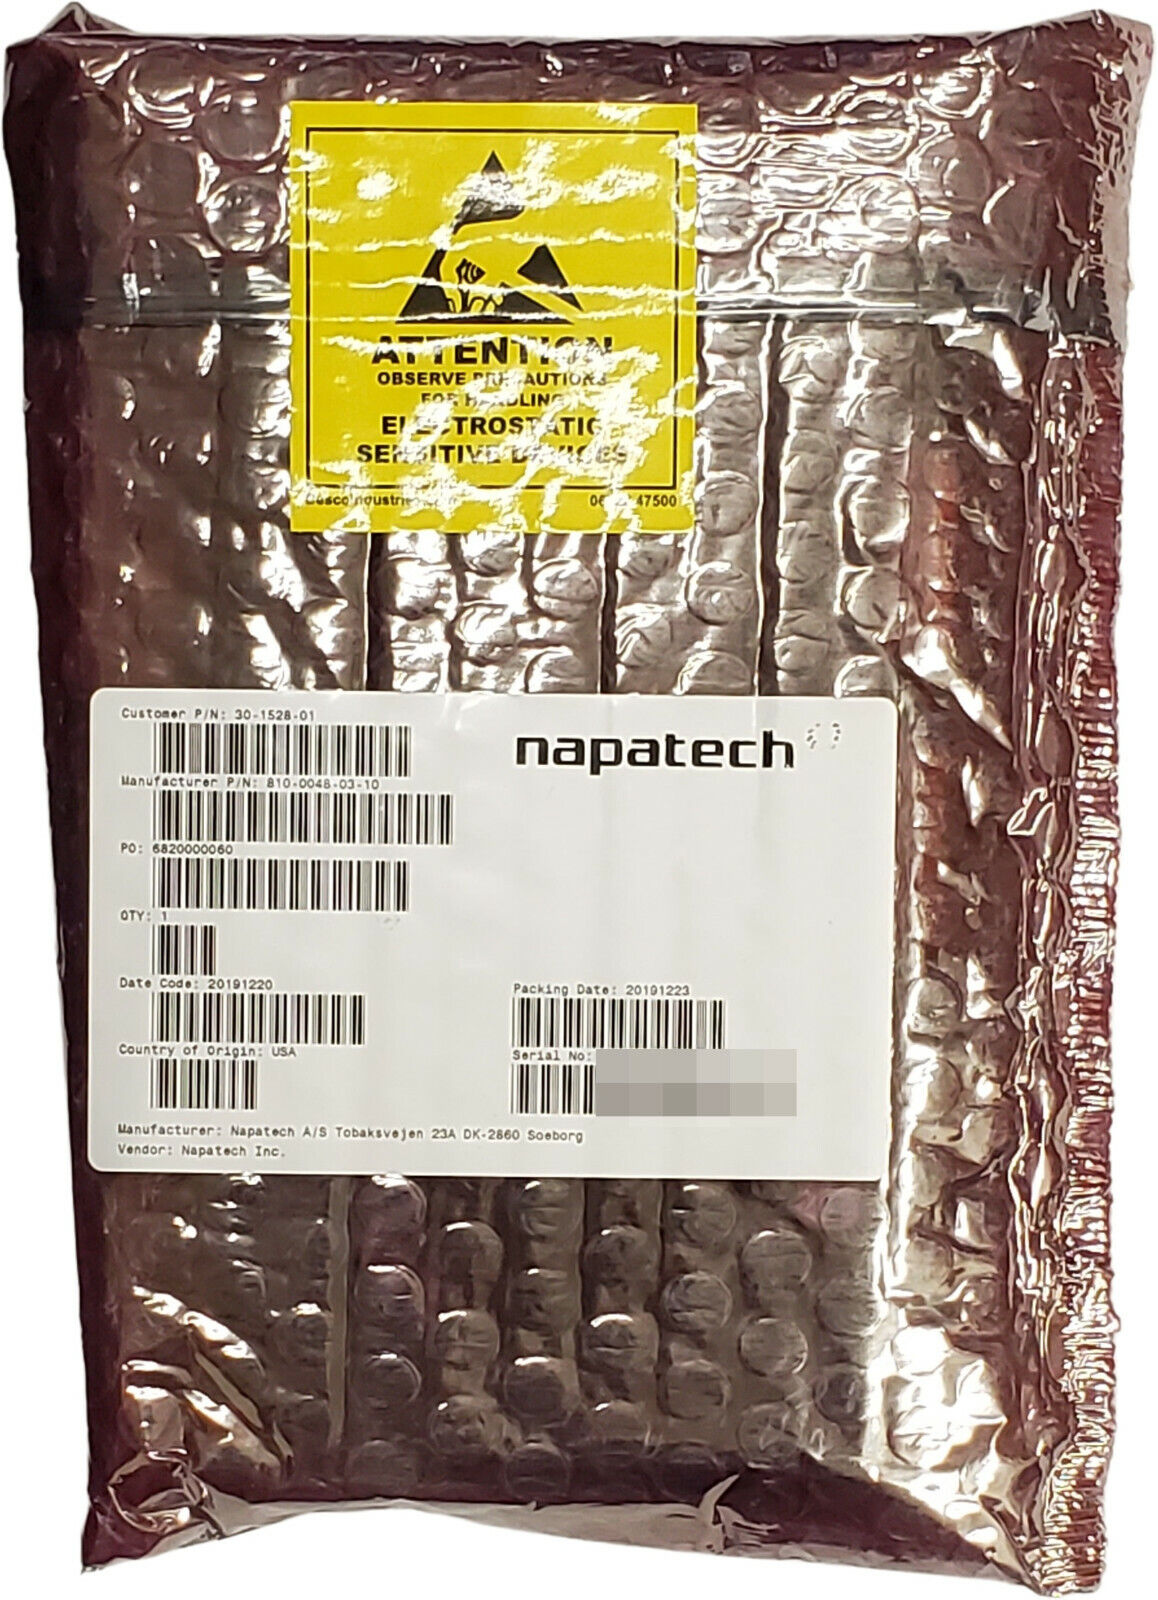 NEW Napatech NT40E3-4-PTP 4x 10GbE Packet Capture & Analysis SmartNIC